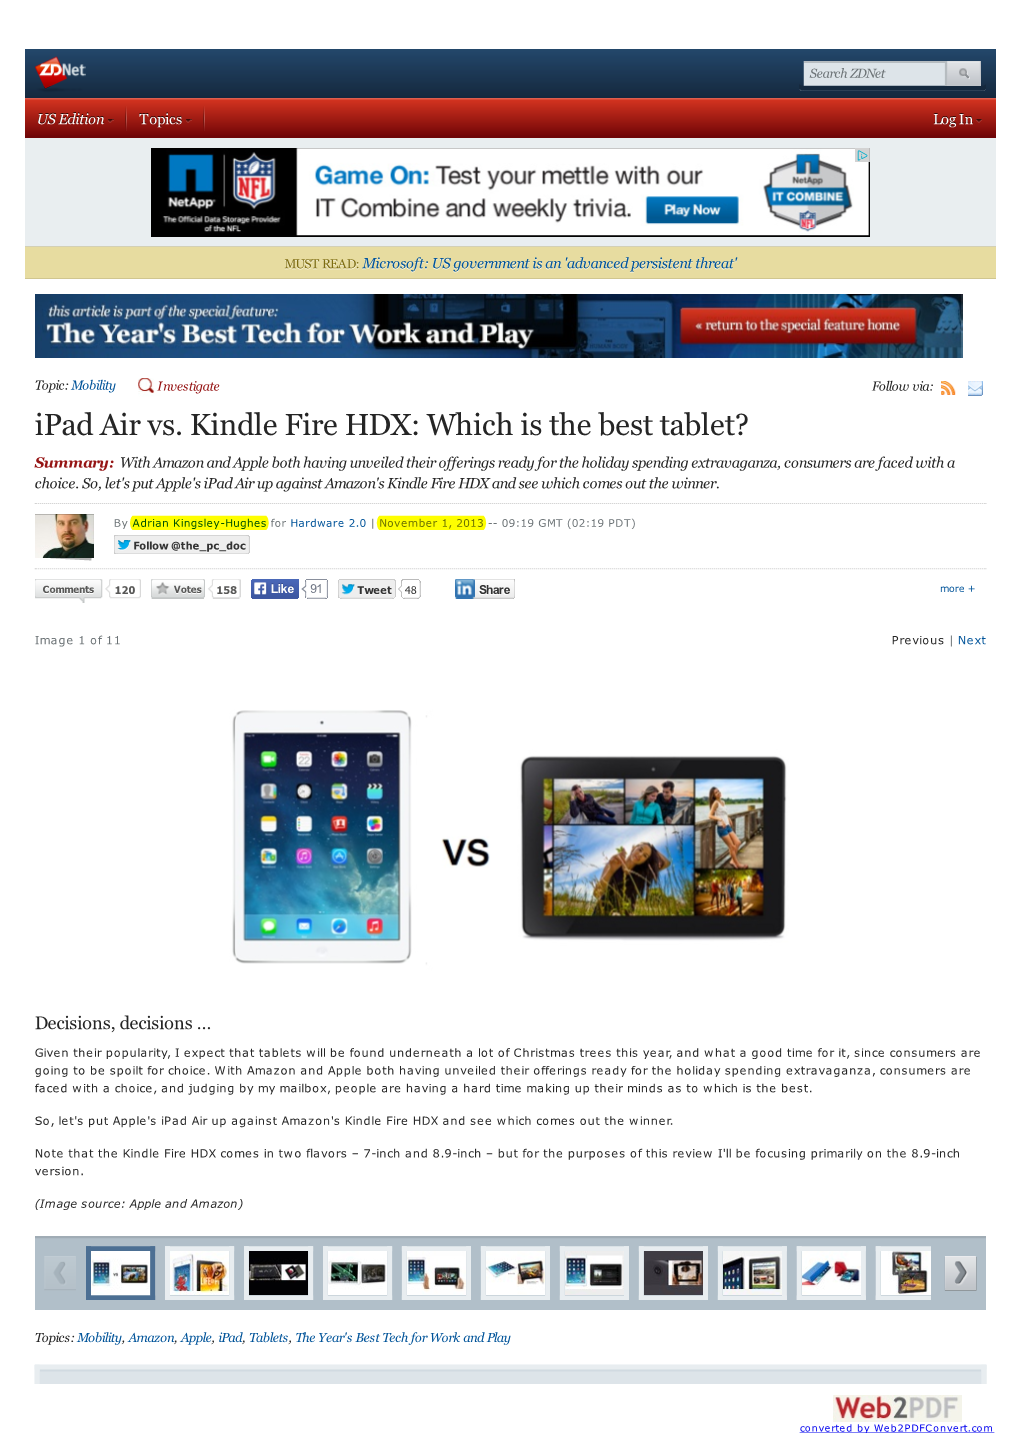 Ipad Air Vs. Kindle Fire HDX: Which Is the Best Tablet? | Zdnet